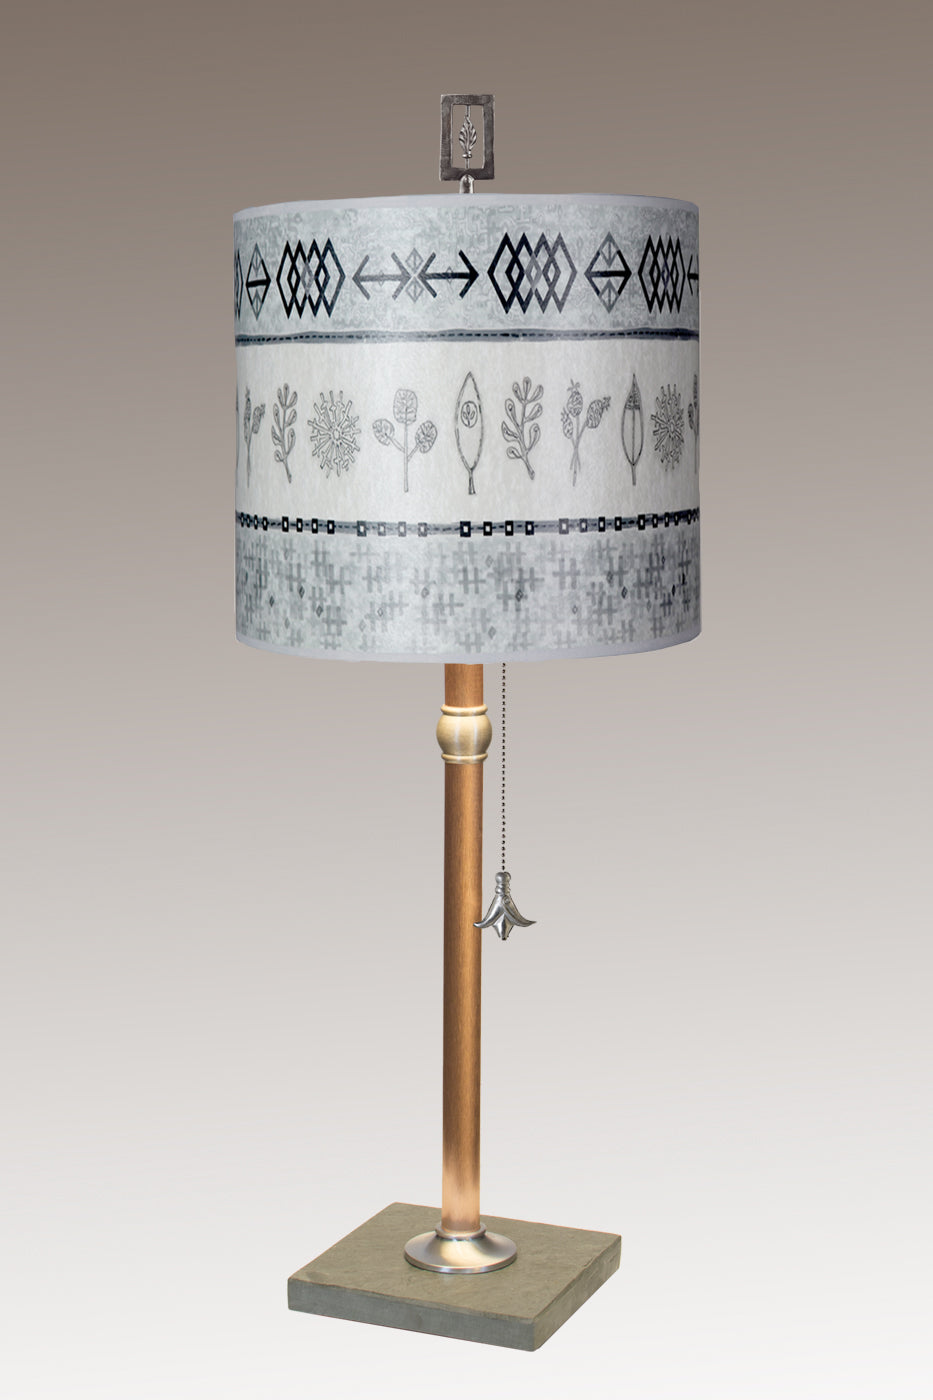 Janna Ugone &amp; Co Table Lamps Copper Table Lamp with Medium Drum Shade in Woven &amp; Sprig in Mist